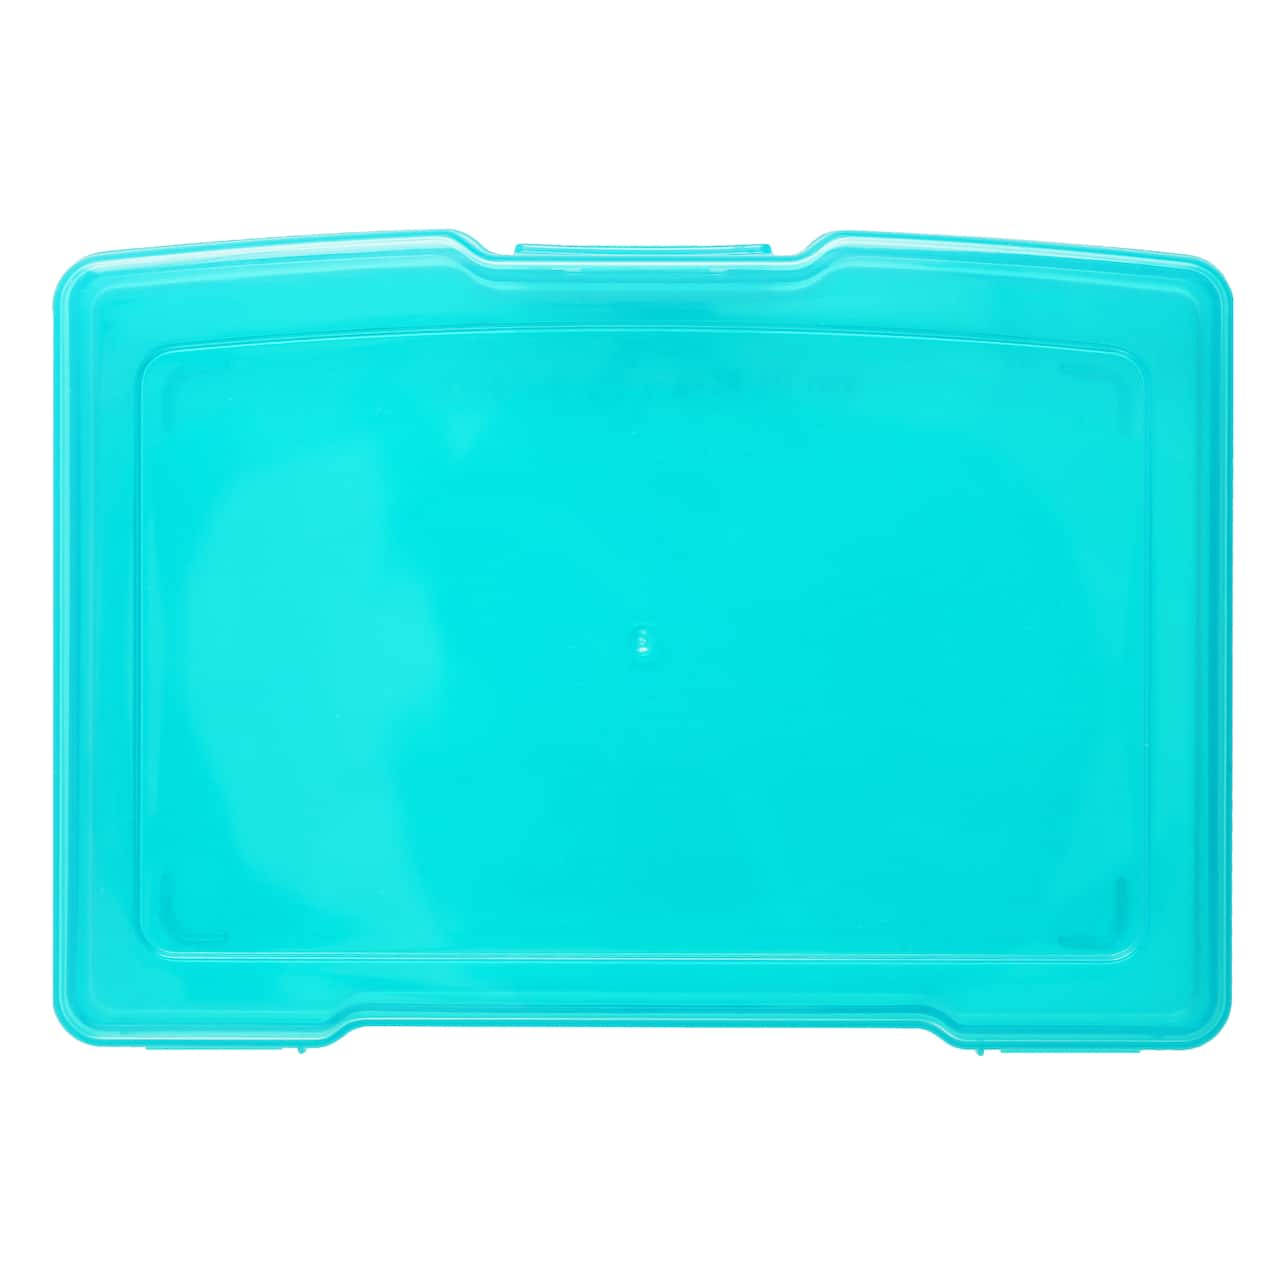 Simply Tidy Plastic Photo Case - Teal - 4 x 6 in